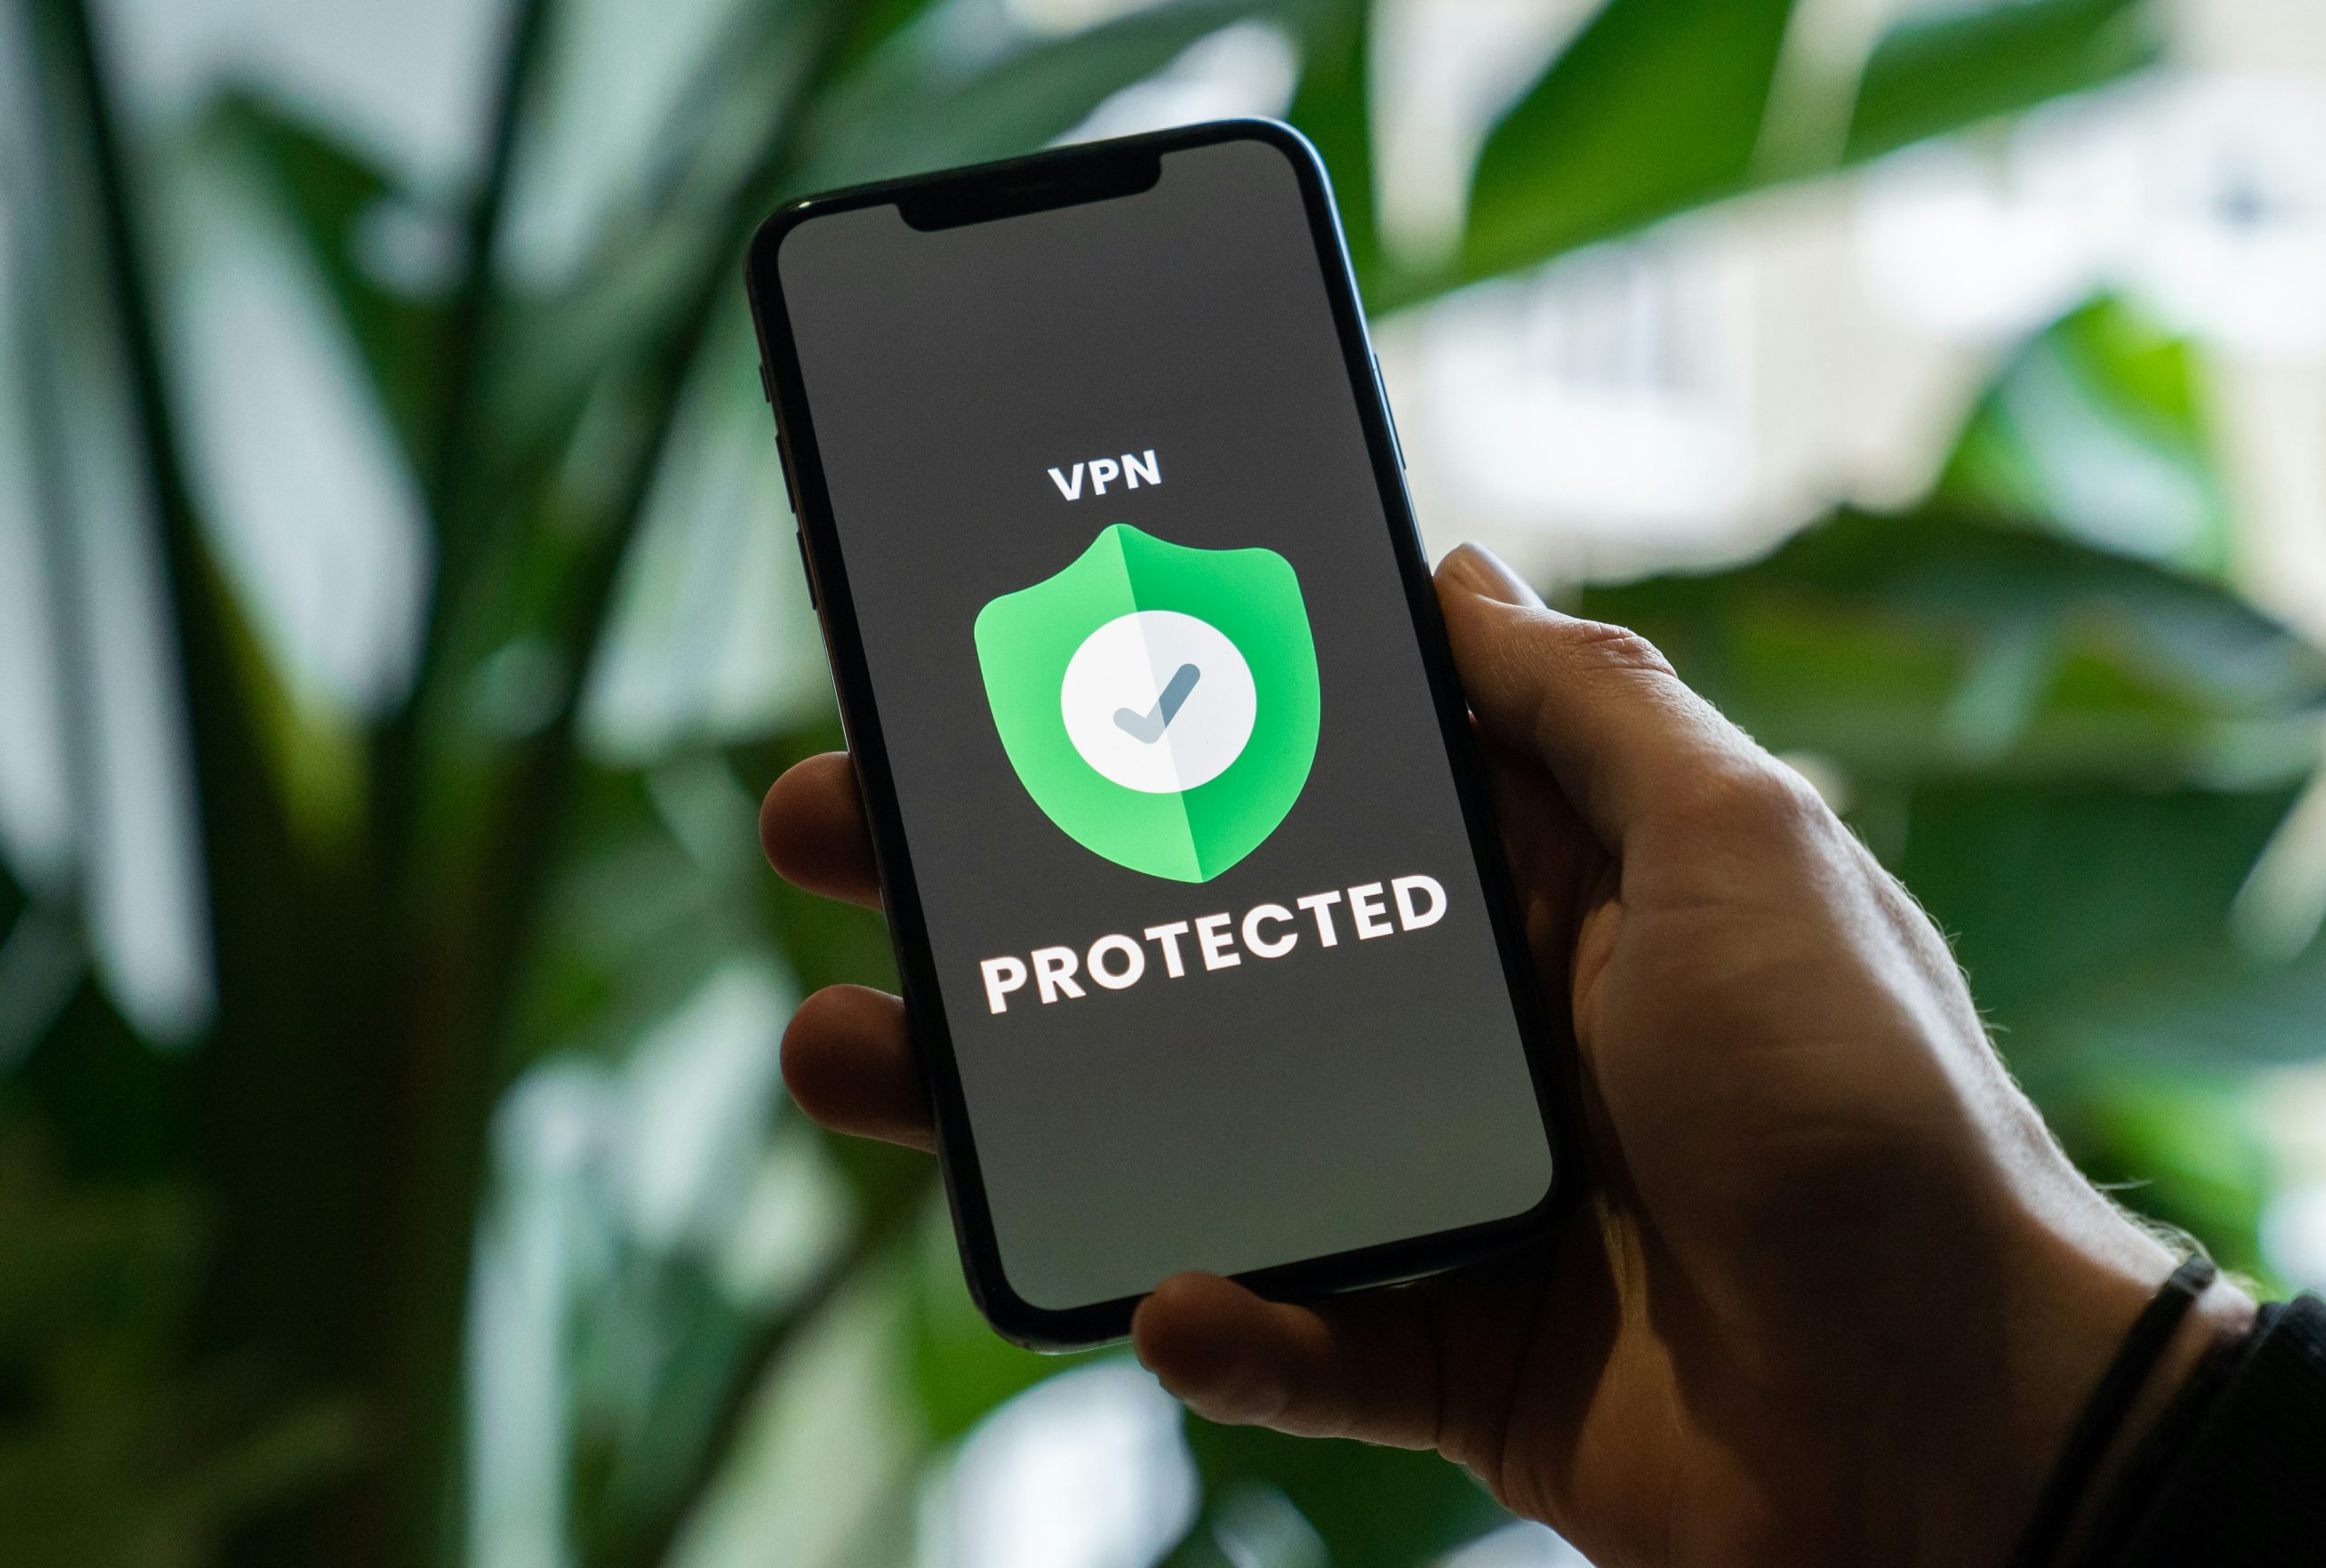 Do VPN Providers Take Action Not to Serve the Bad Guys?